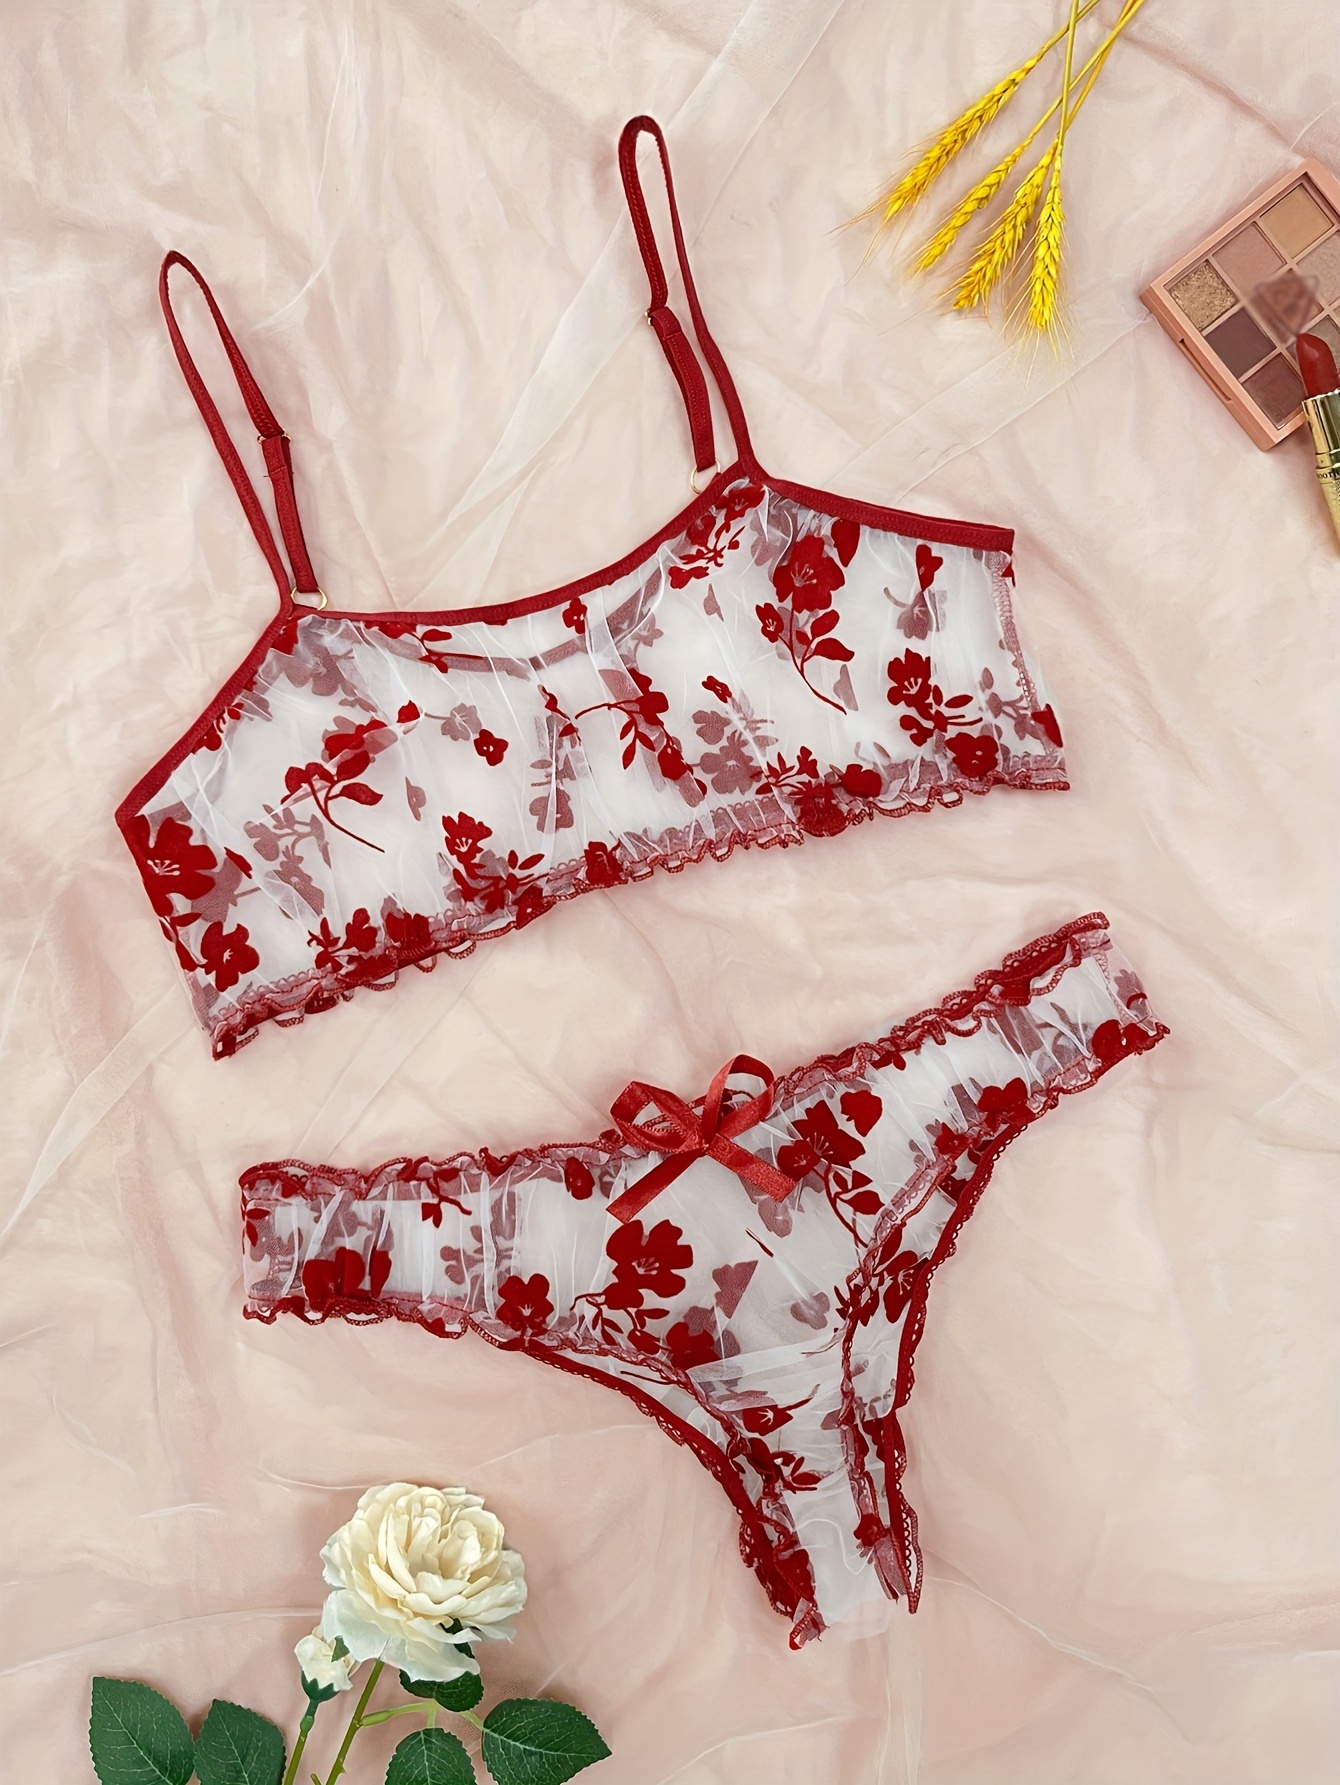 Petite Red Strappy Sheer Lace Bodysuit. Petite